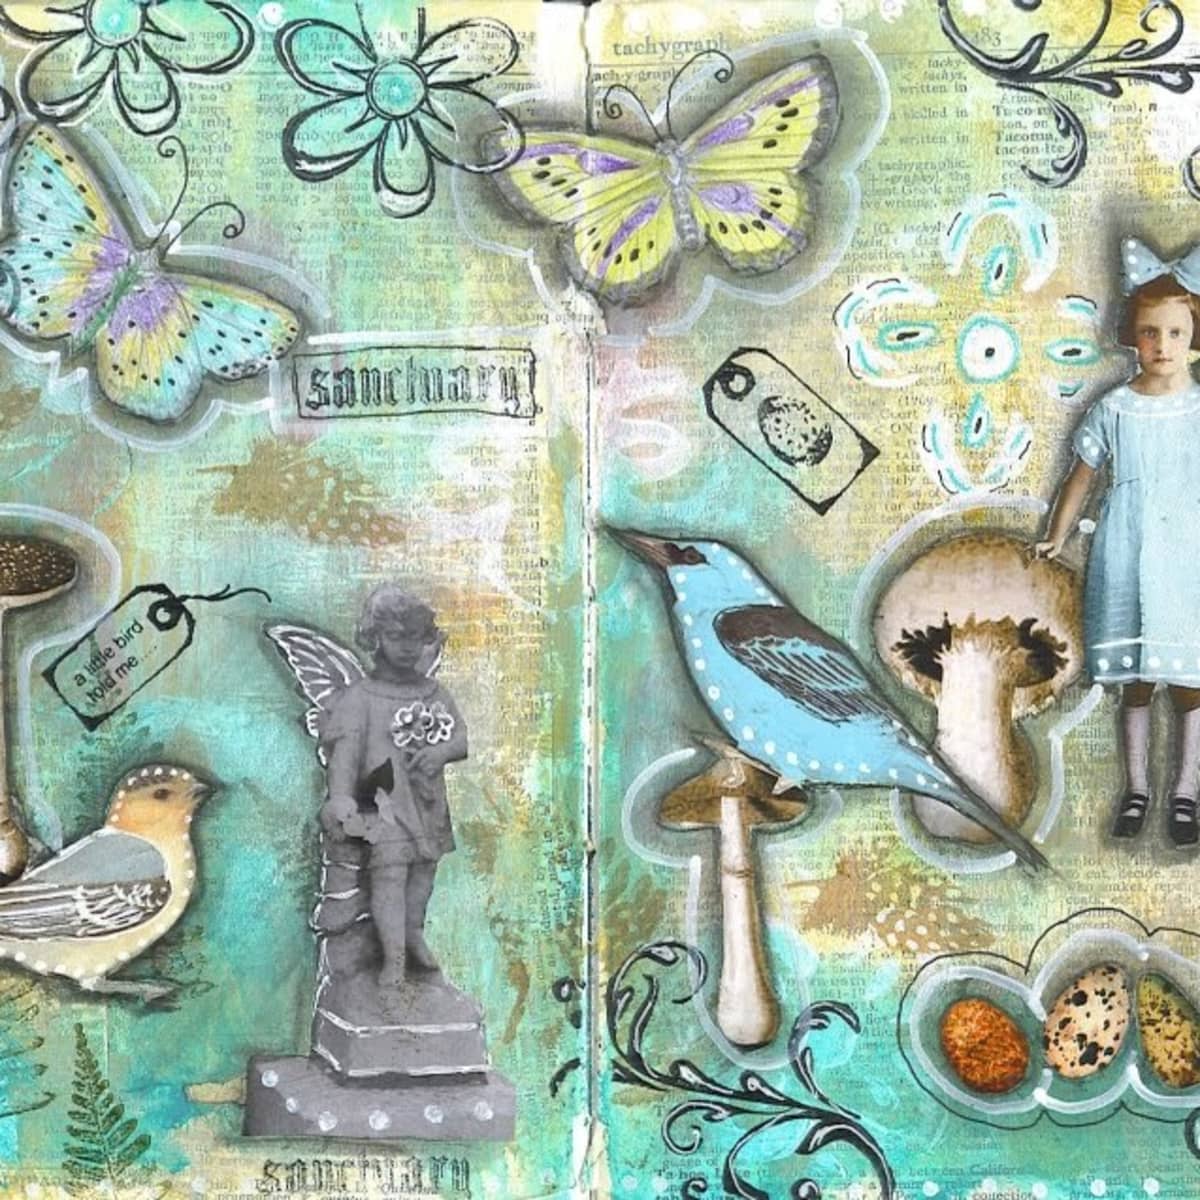 Mixed Media Collage in my Art Journal 